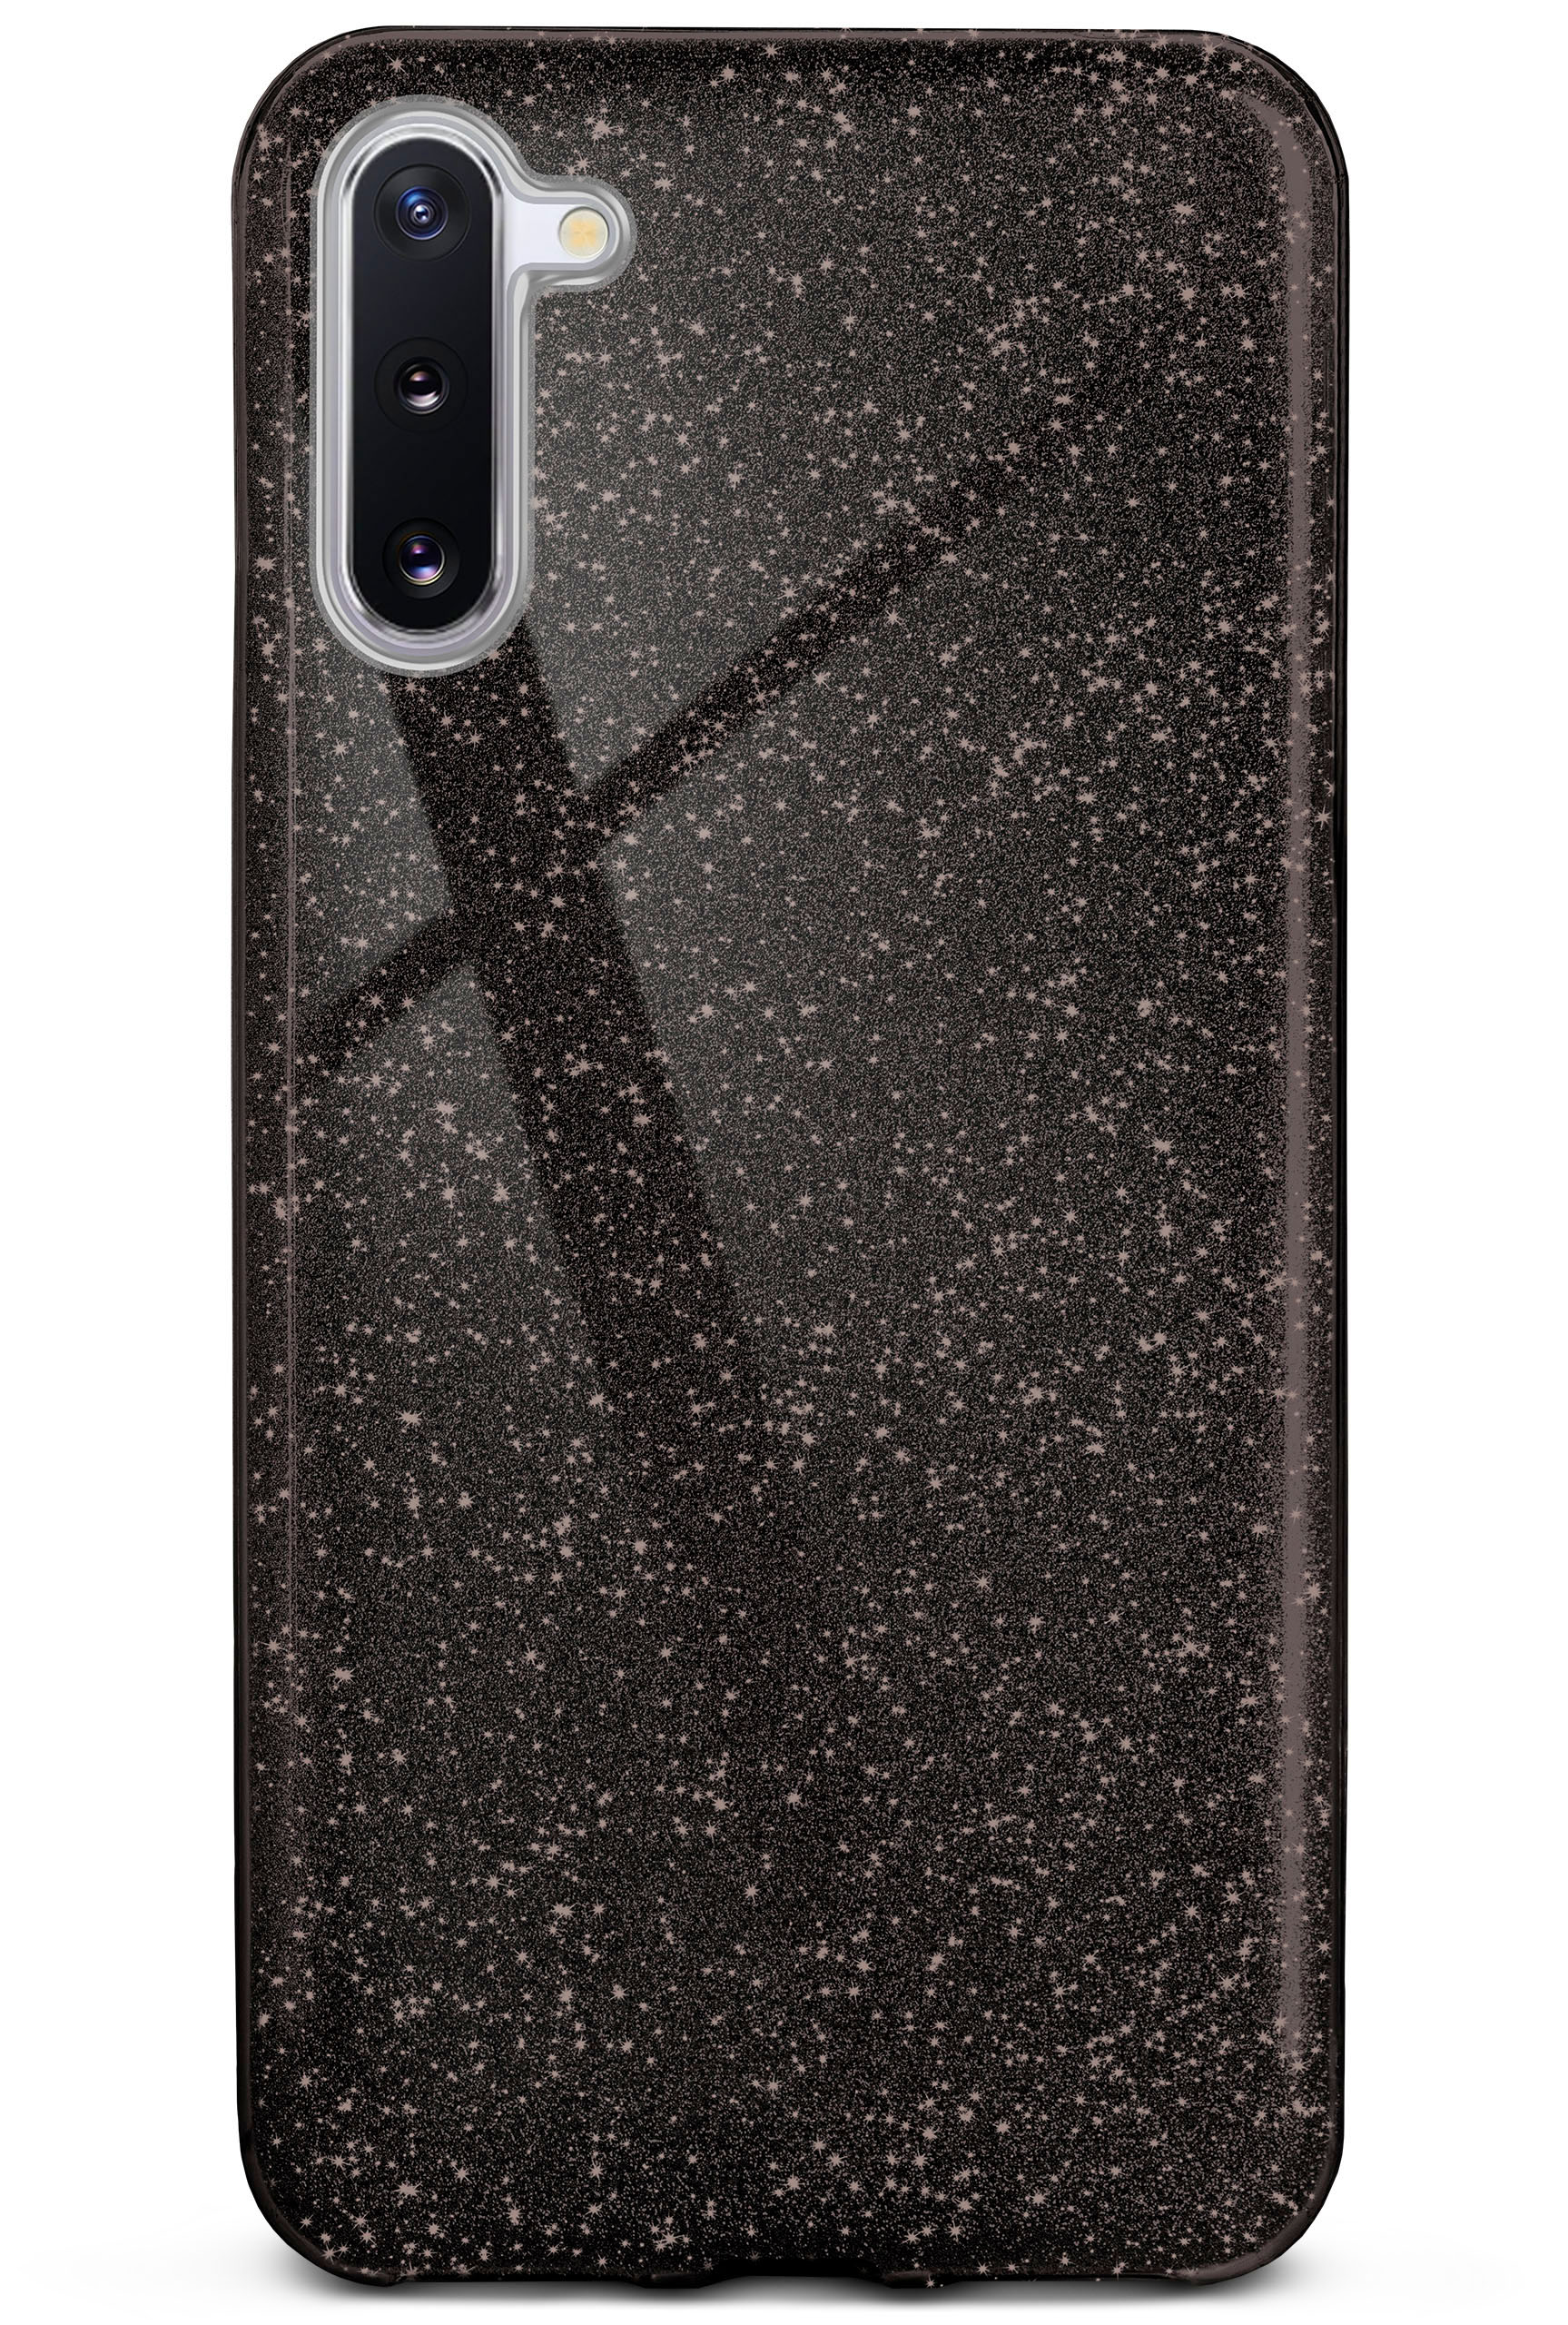 Galaxy Glamour Glitter Case, Samsung, - ONEFLOW Black 10, Backcover, Note